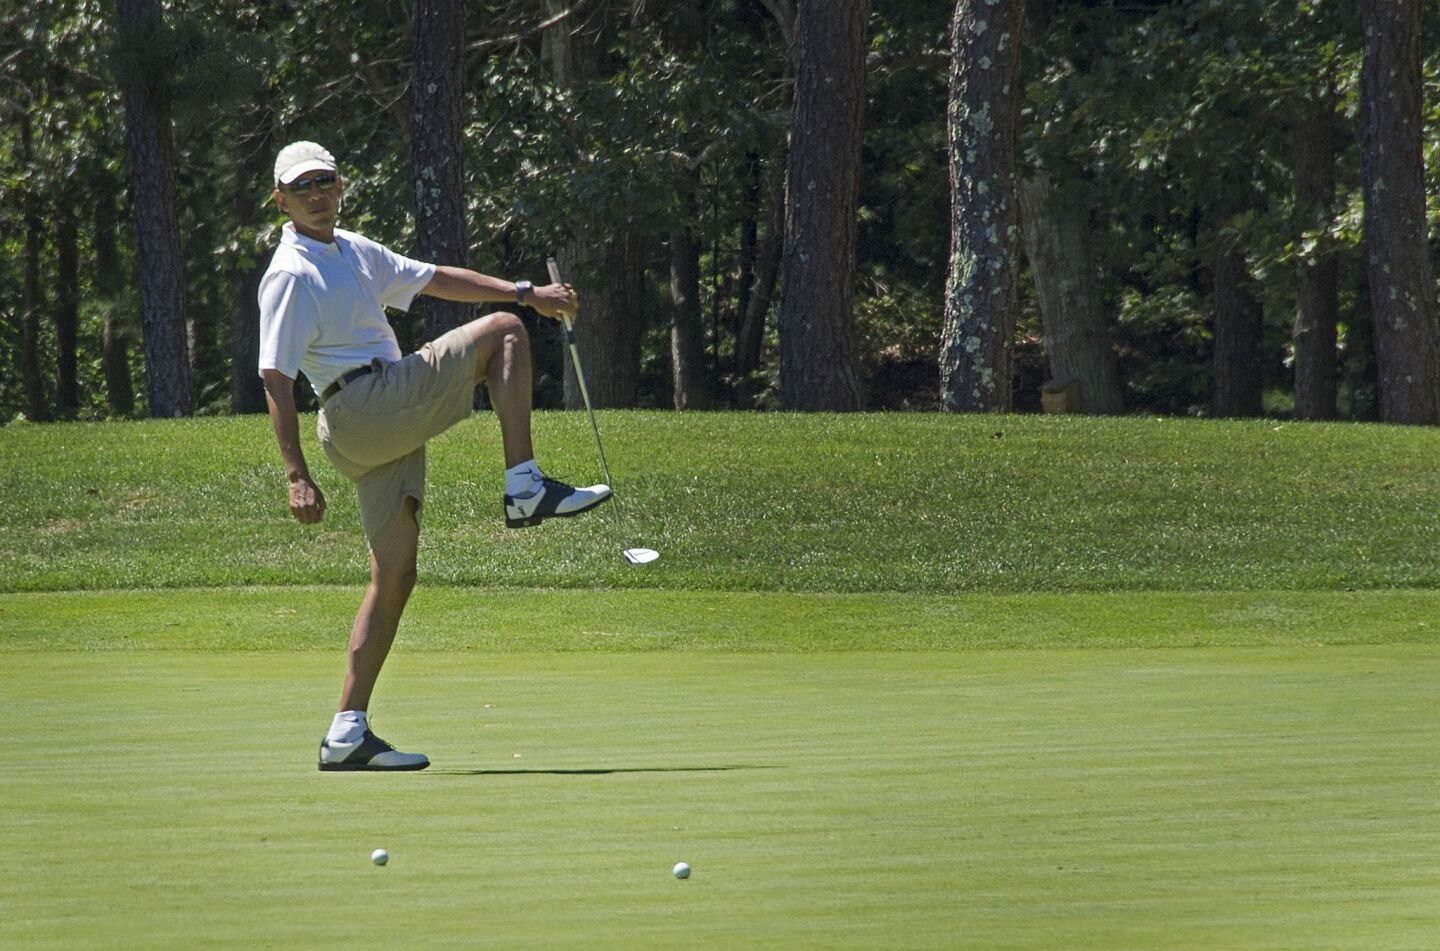 President Obama reacts to a missed putt on the first green at Farm Neck Golf Club in Oak Bluffs, Mass., during the Obama family vacation at Martha's Vineyard.